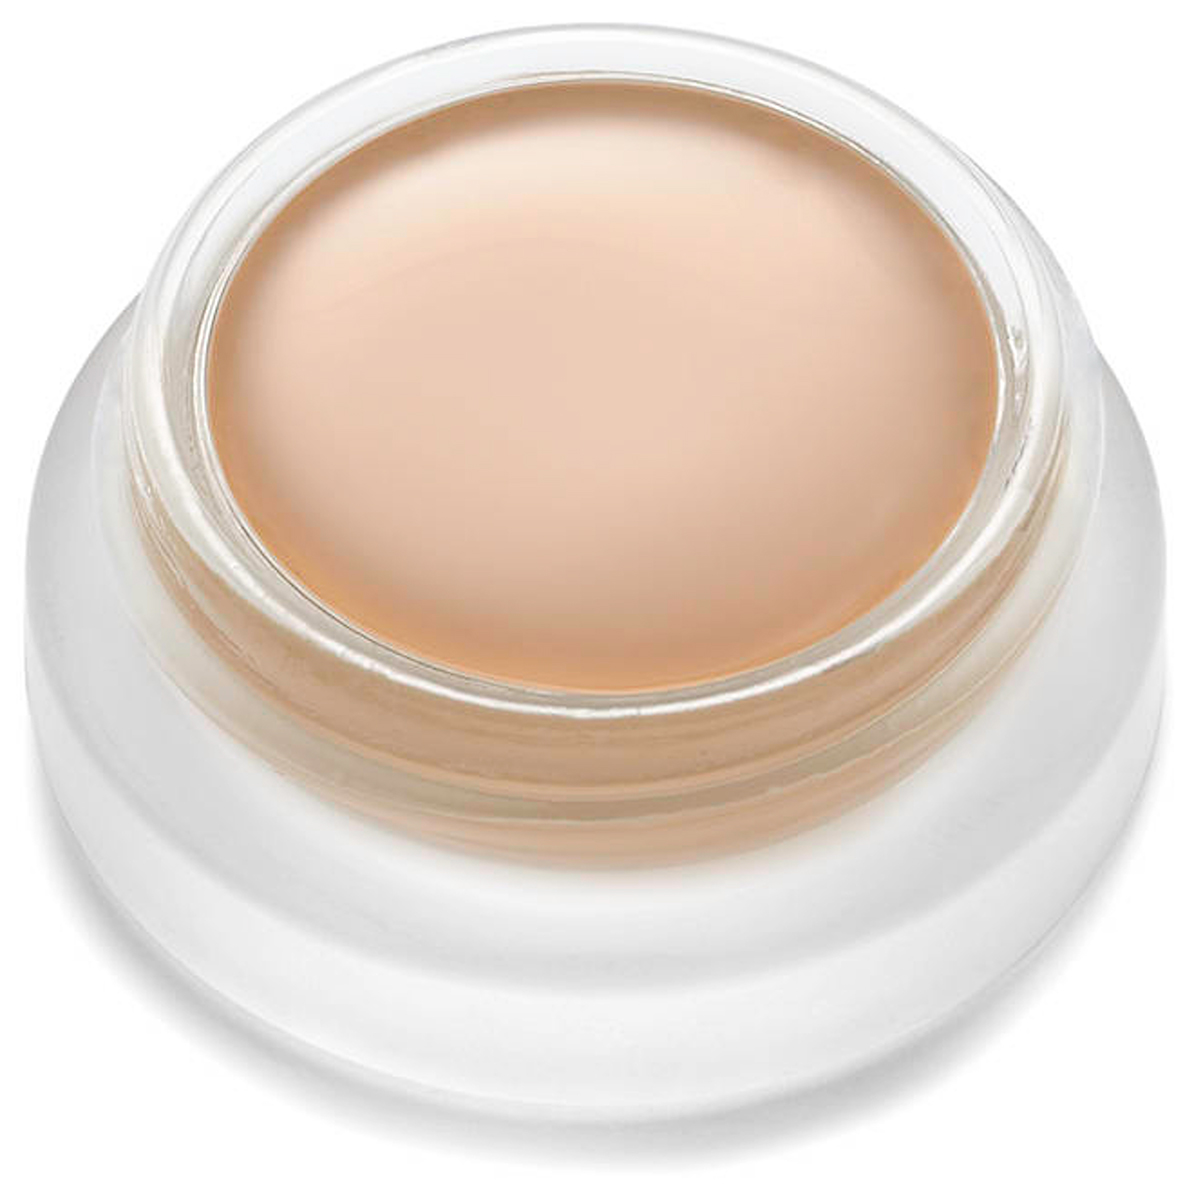 UnCover Up, nr 11 5,7 g rms beauty Concealer